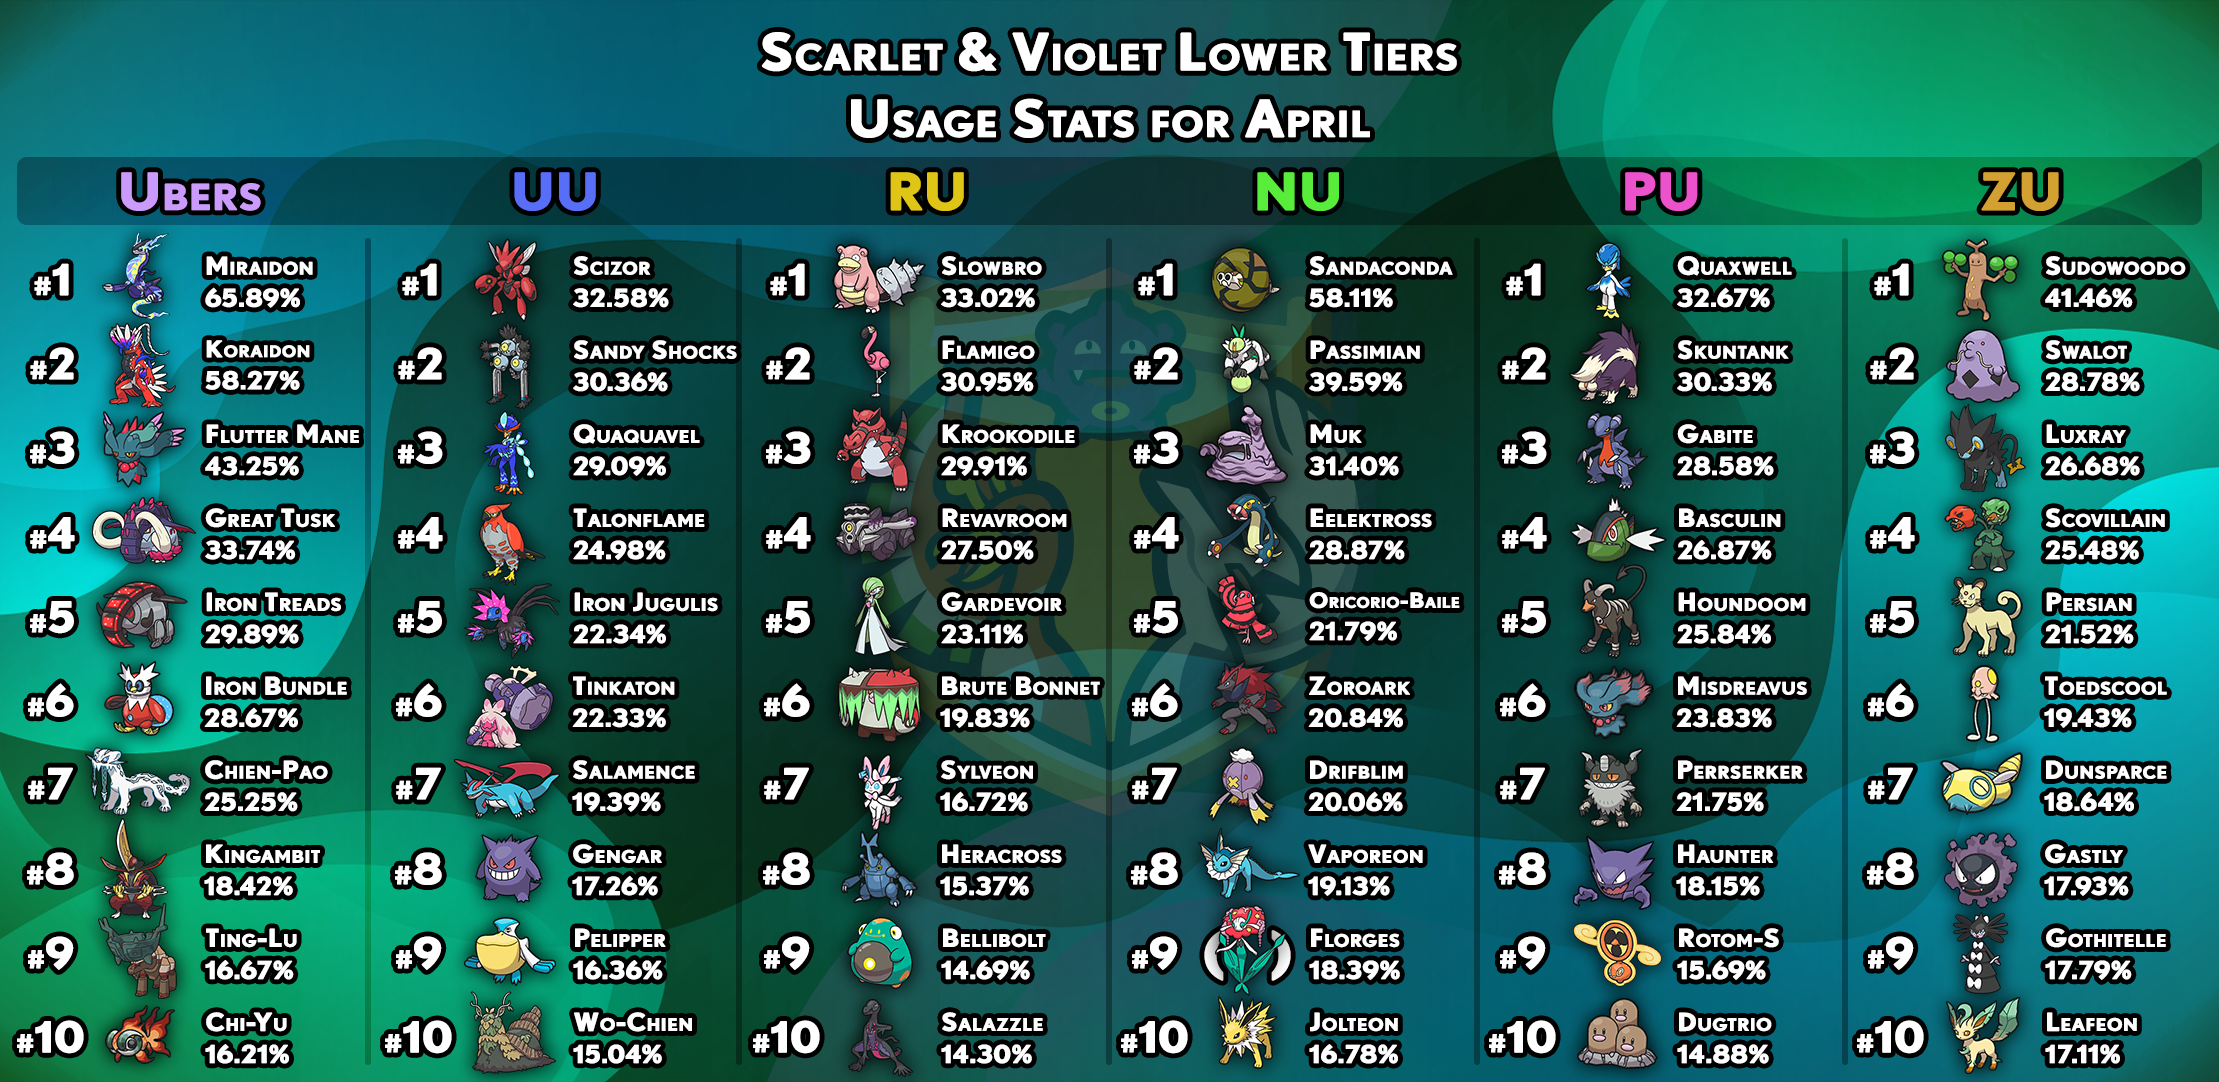 usagestats-gen9-other-tiers-april.png